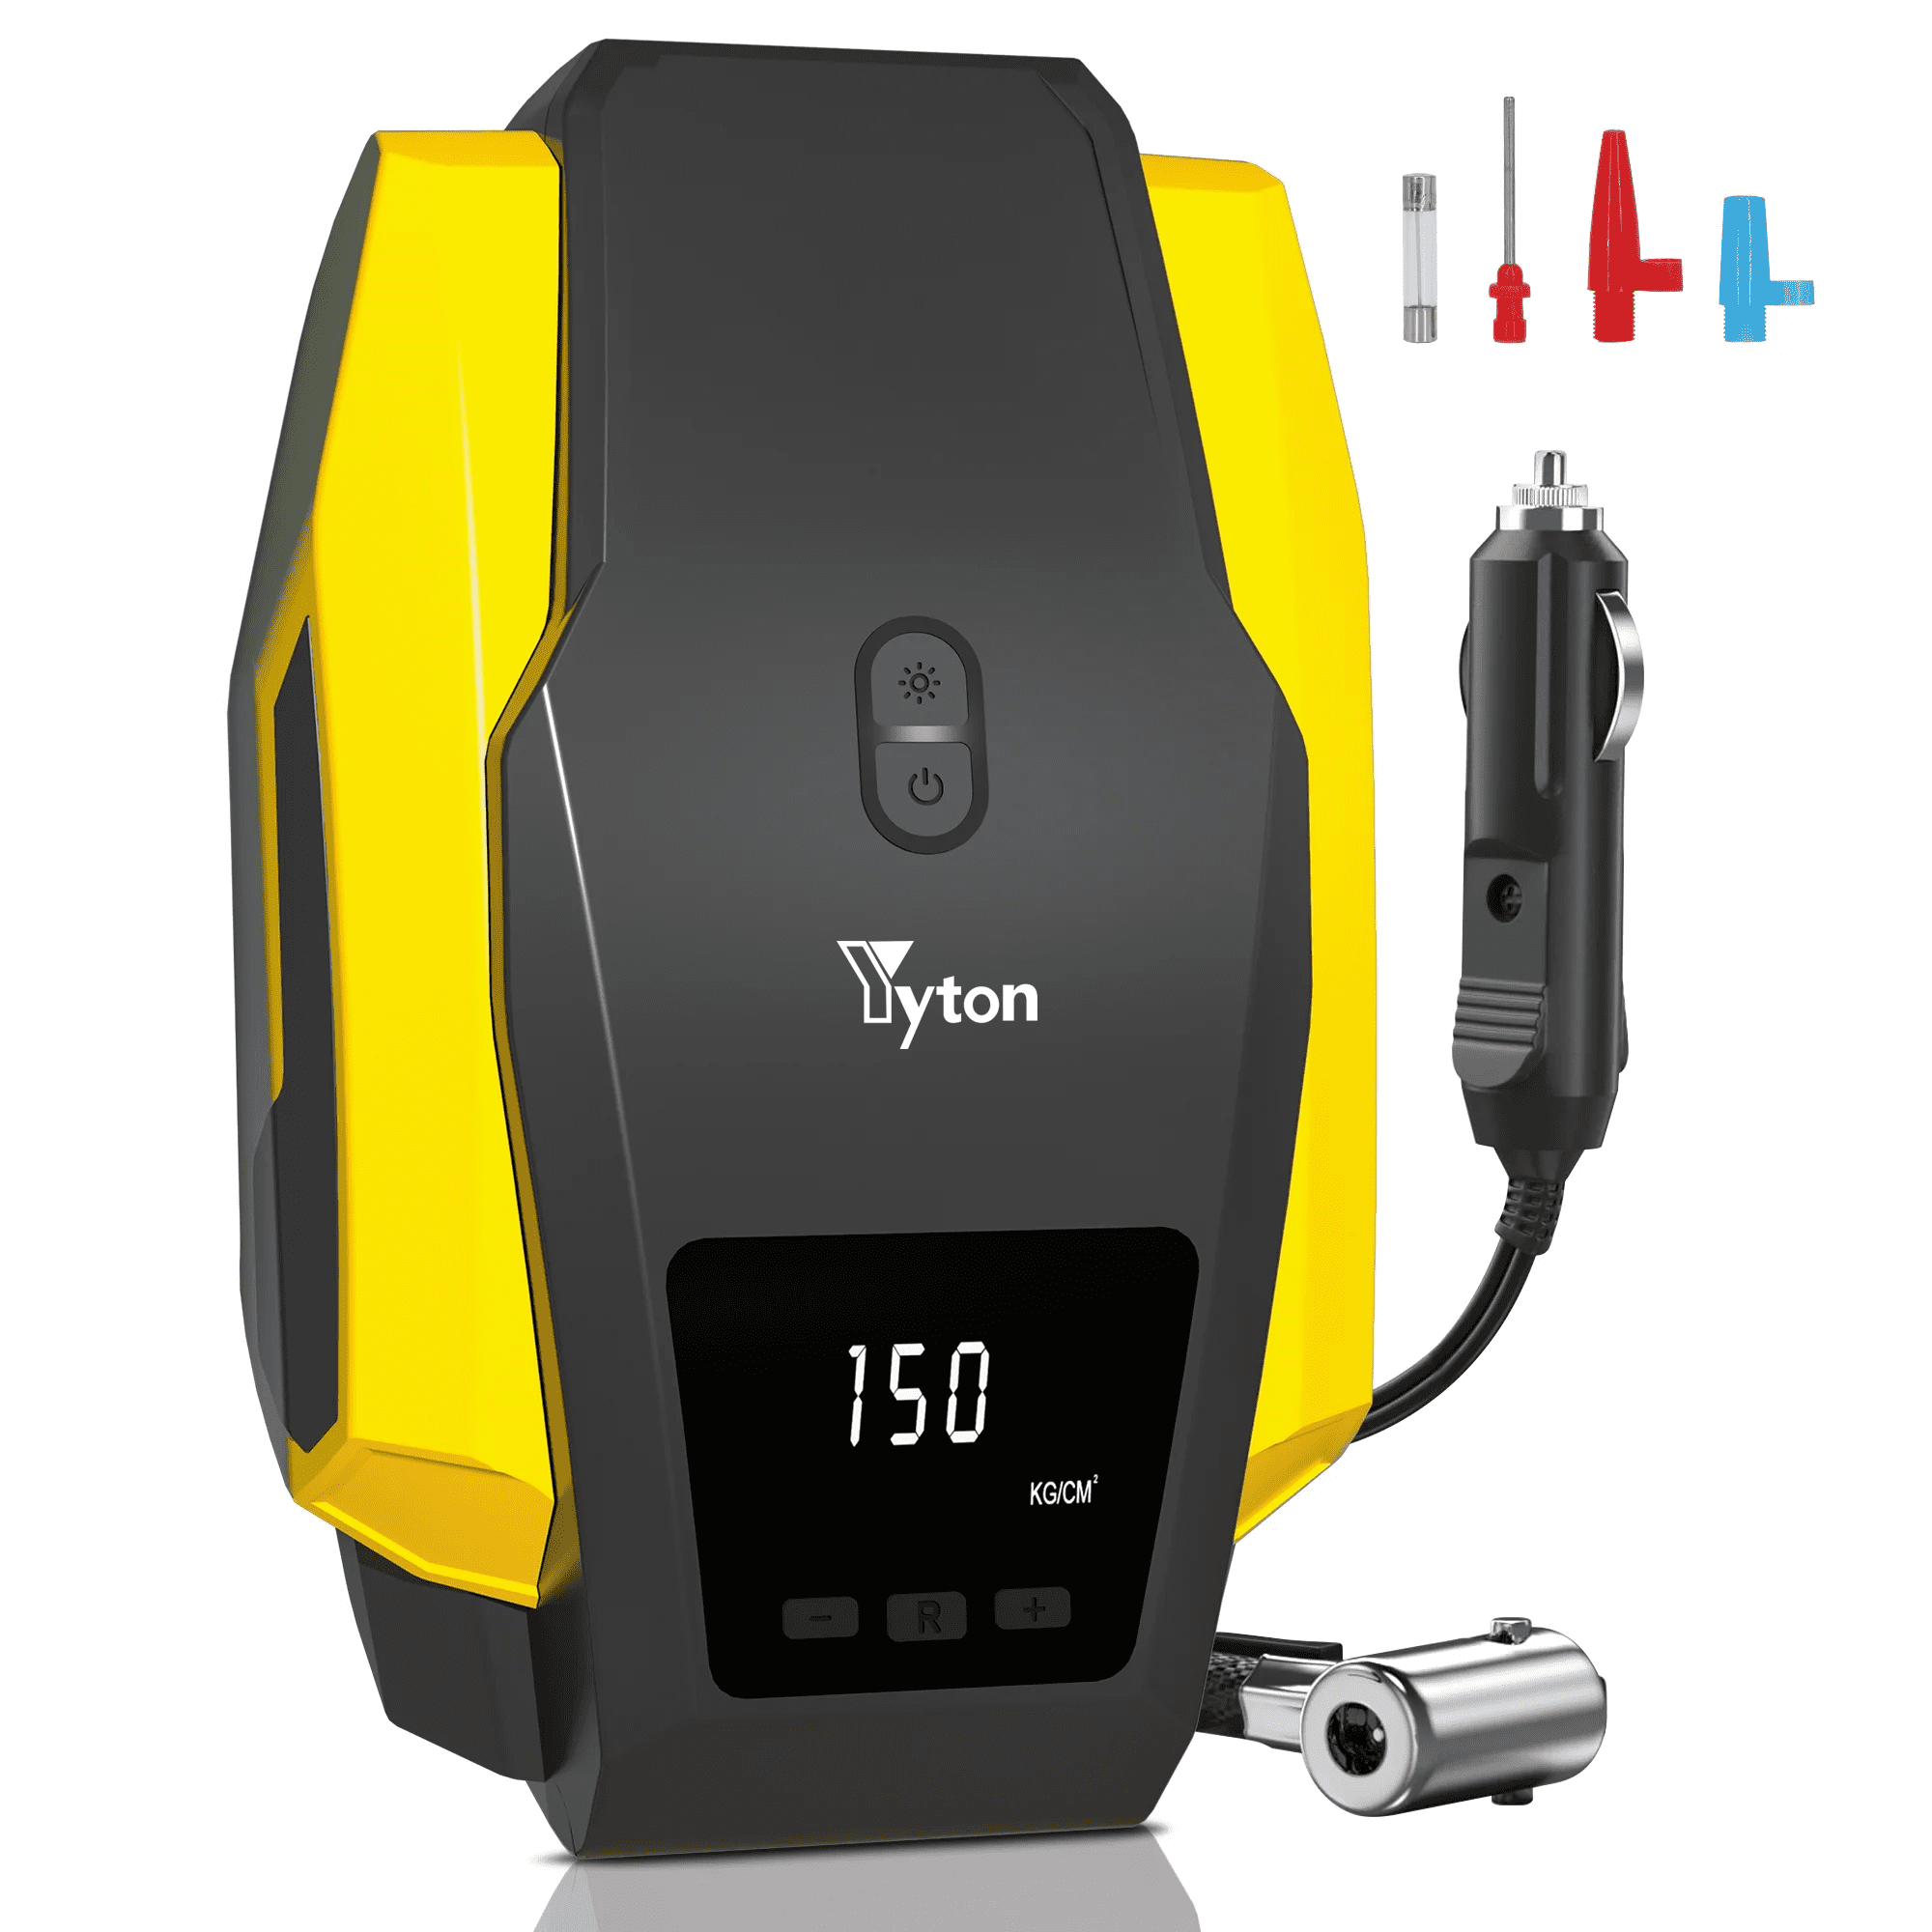 VacLife Tire Inflator Portable Air Compressor - Air Pump for Car Tires (up  to 50 PSI), 12V DC Tire Pump for Bikes (up to 150 PSI) w/LED Light, Digital